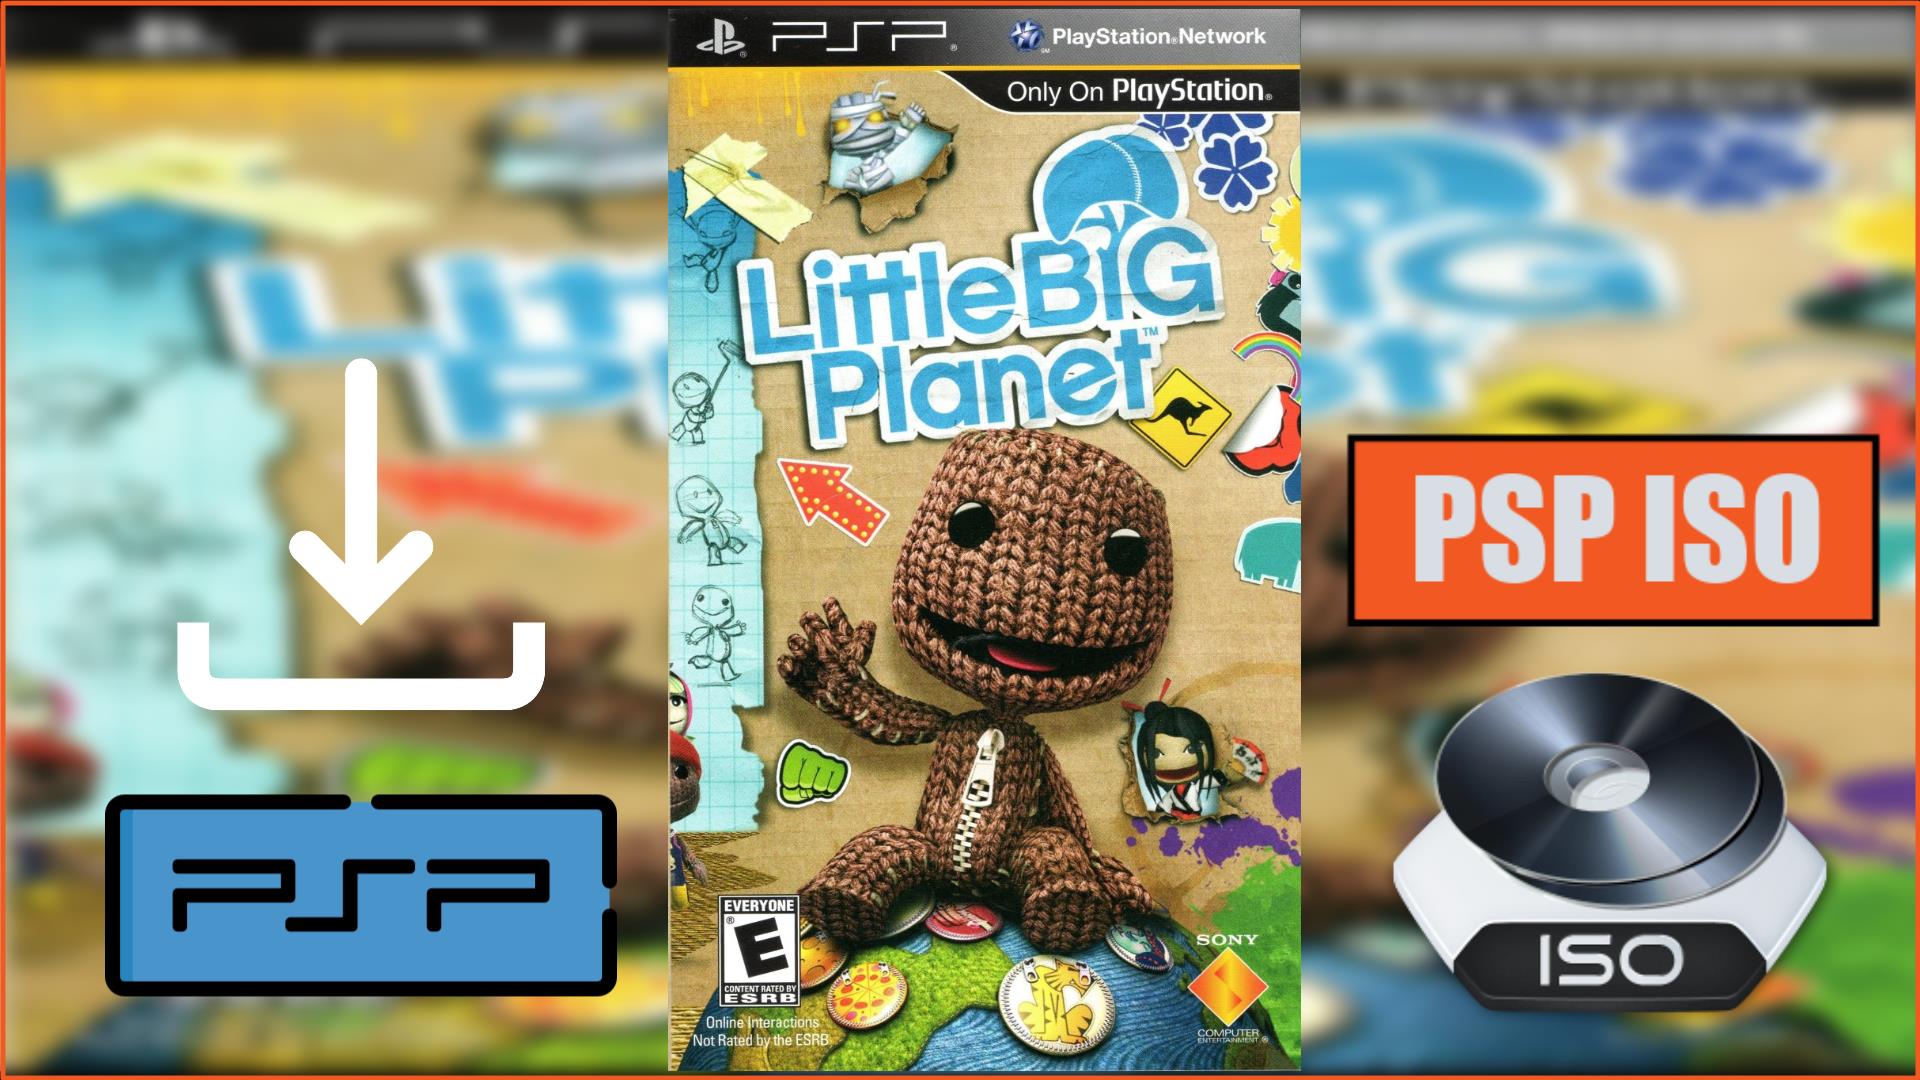 Little Big Planet PSP ISO Download